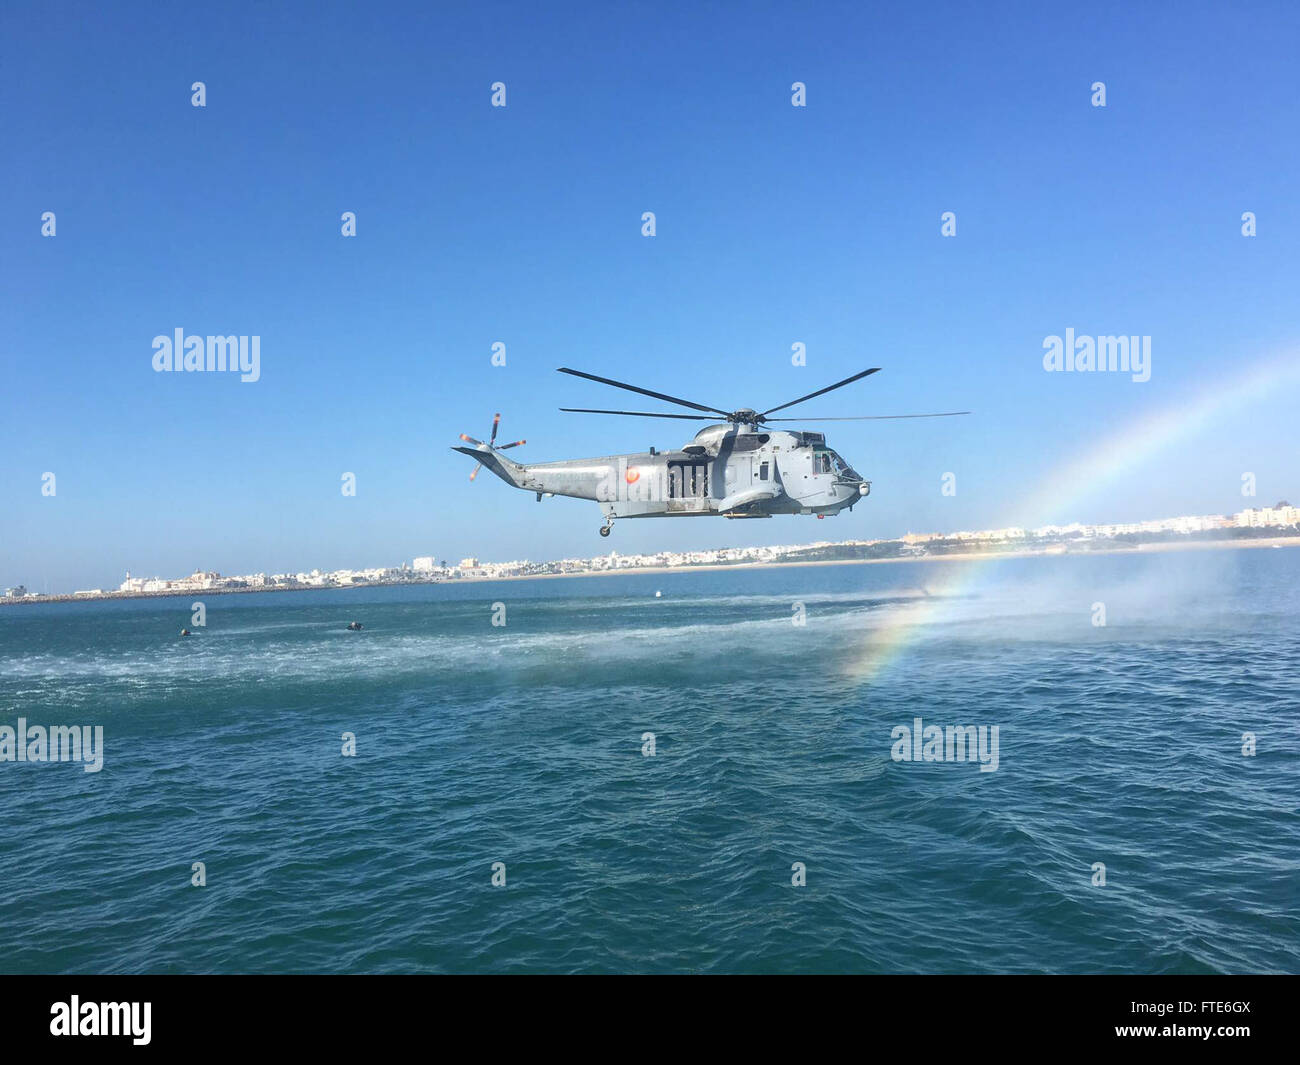 151119-N-ZZ999-210 NAVAL STATION ROTA, Spain (Nov. 19, 2015) Sailors from Explosive Ordnance Disposal Mobile Unit 8, German navy Minetaucher Kompanie and Spanish Navy Unidads Buceadores MCM jump from a Spanish Navy helicopter into Cadiz Bay off the coast of Rota, Spain, as part of Exercise MAGRE 2015-2, Nov. 19. Exercise MAGRE is a tri-lateral counter improvised explosive device exercise involving Sailors from the U.S. Navy, German navy and hosted by the Spanish navy. (U.S. Navy photo by Explosive Ordnance Disposal Technician 1st Class Jonathan Chapman/ Released) Stock Photo